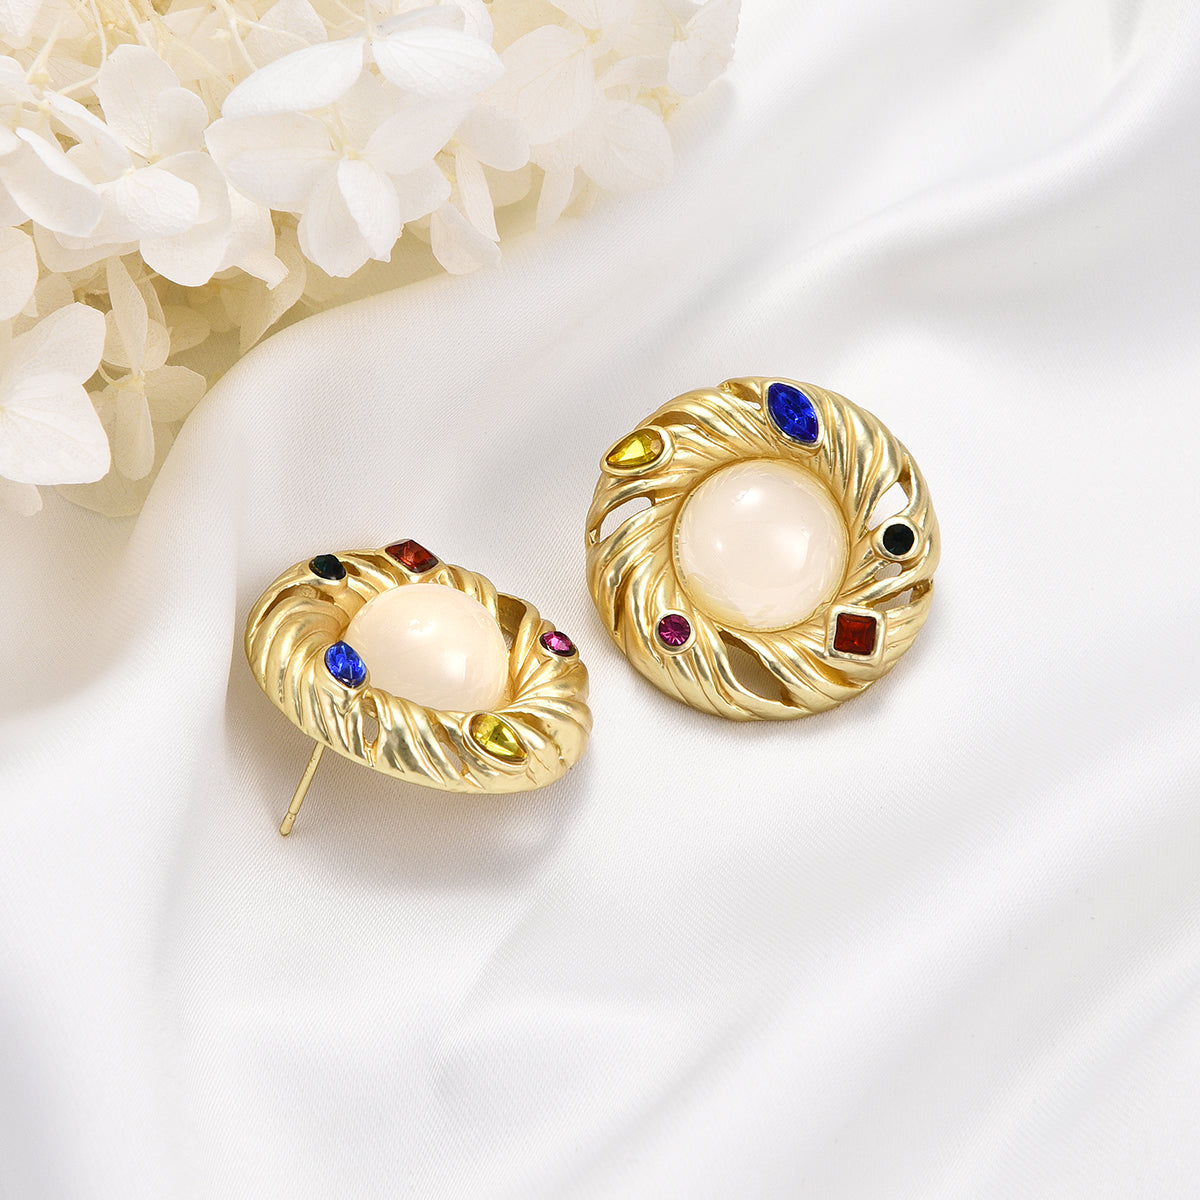 Ornate ivory mirror golden earrings with colorful jewels